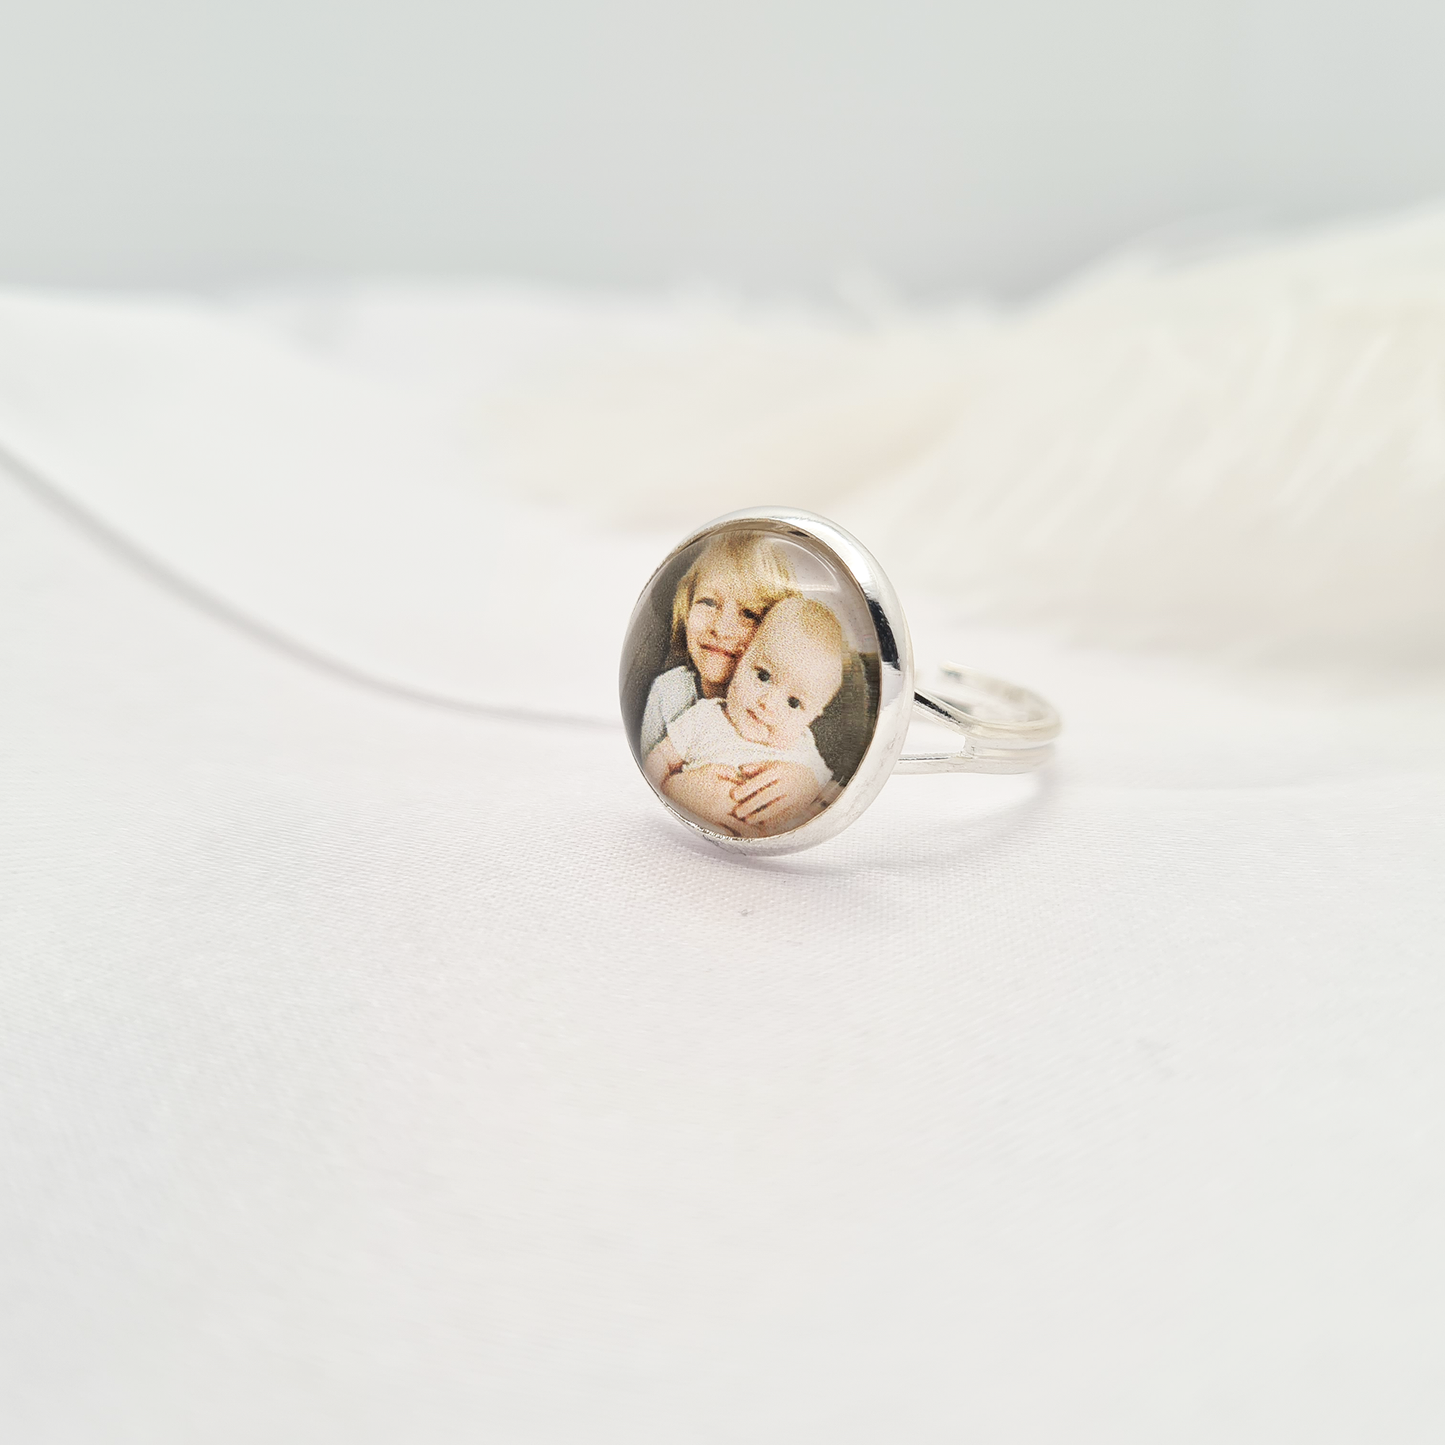 Silver ring personalised with a photo set in glass